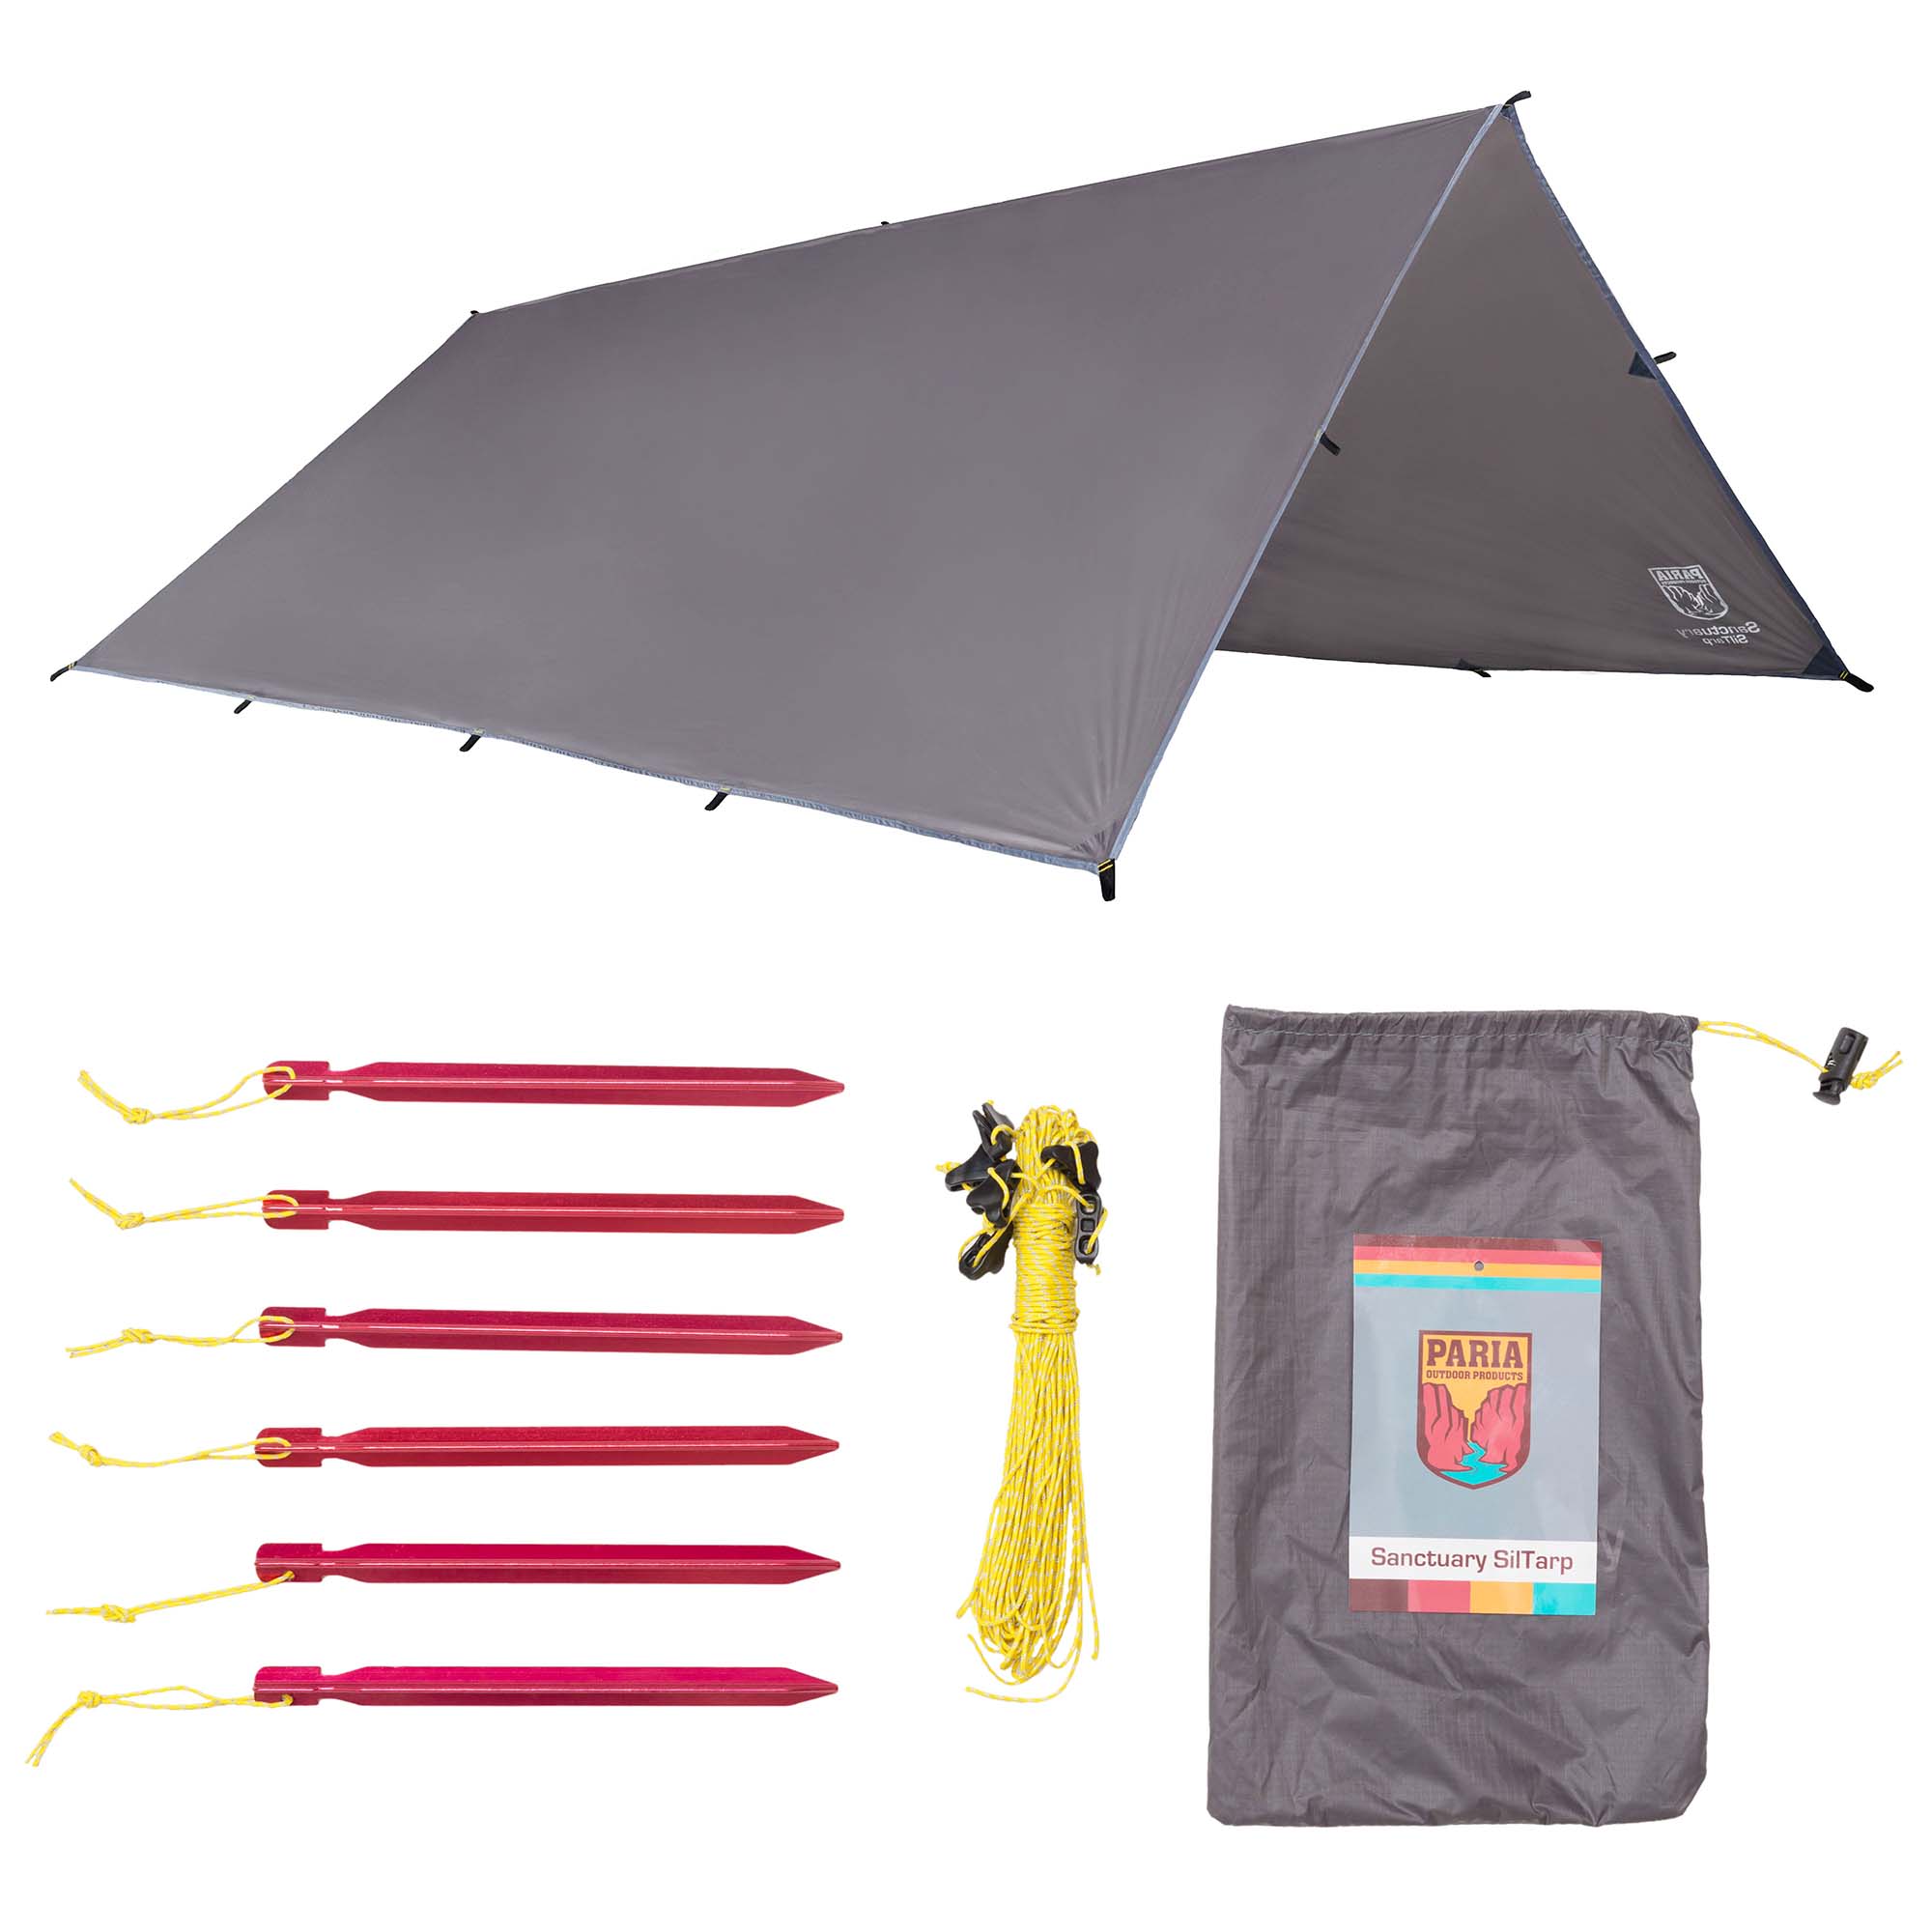 www.pariaoutdoorproducts.com